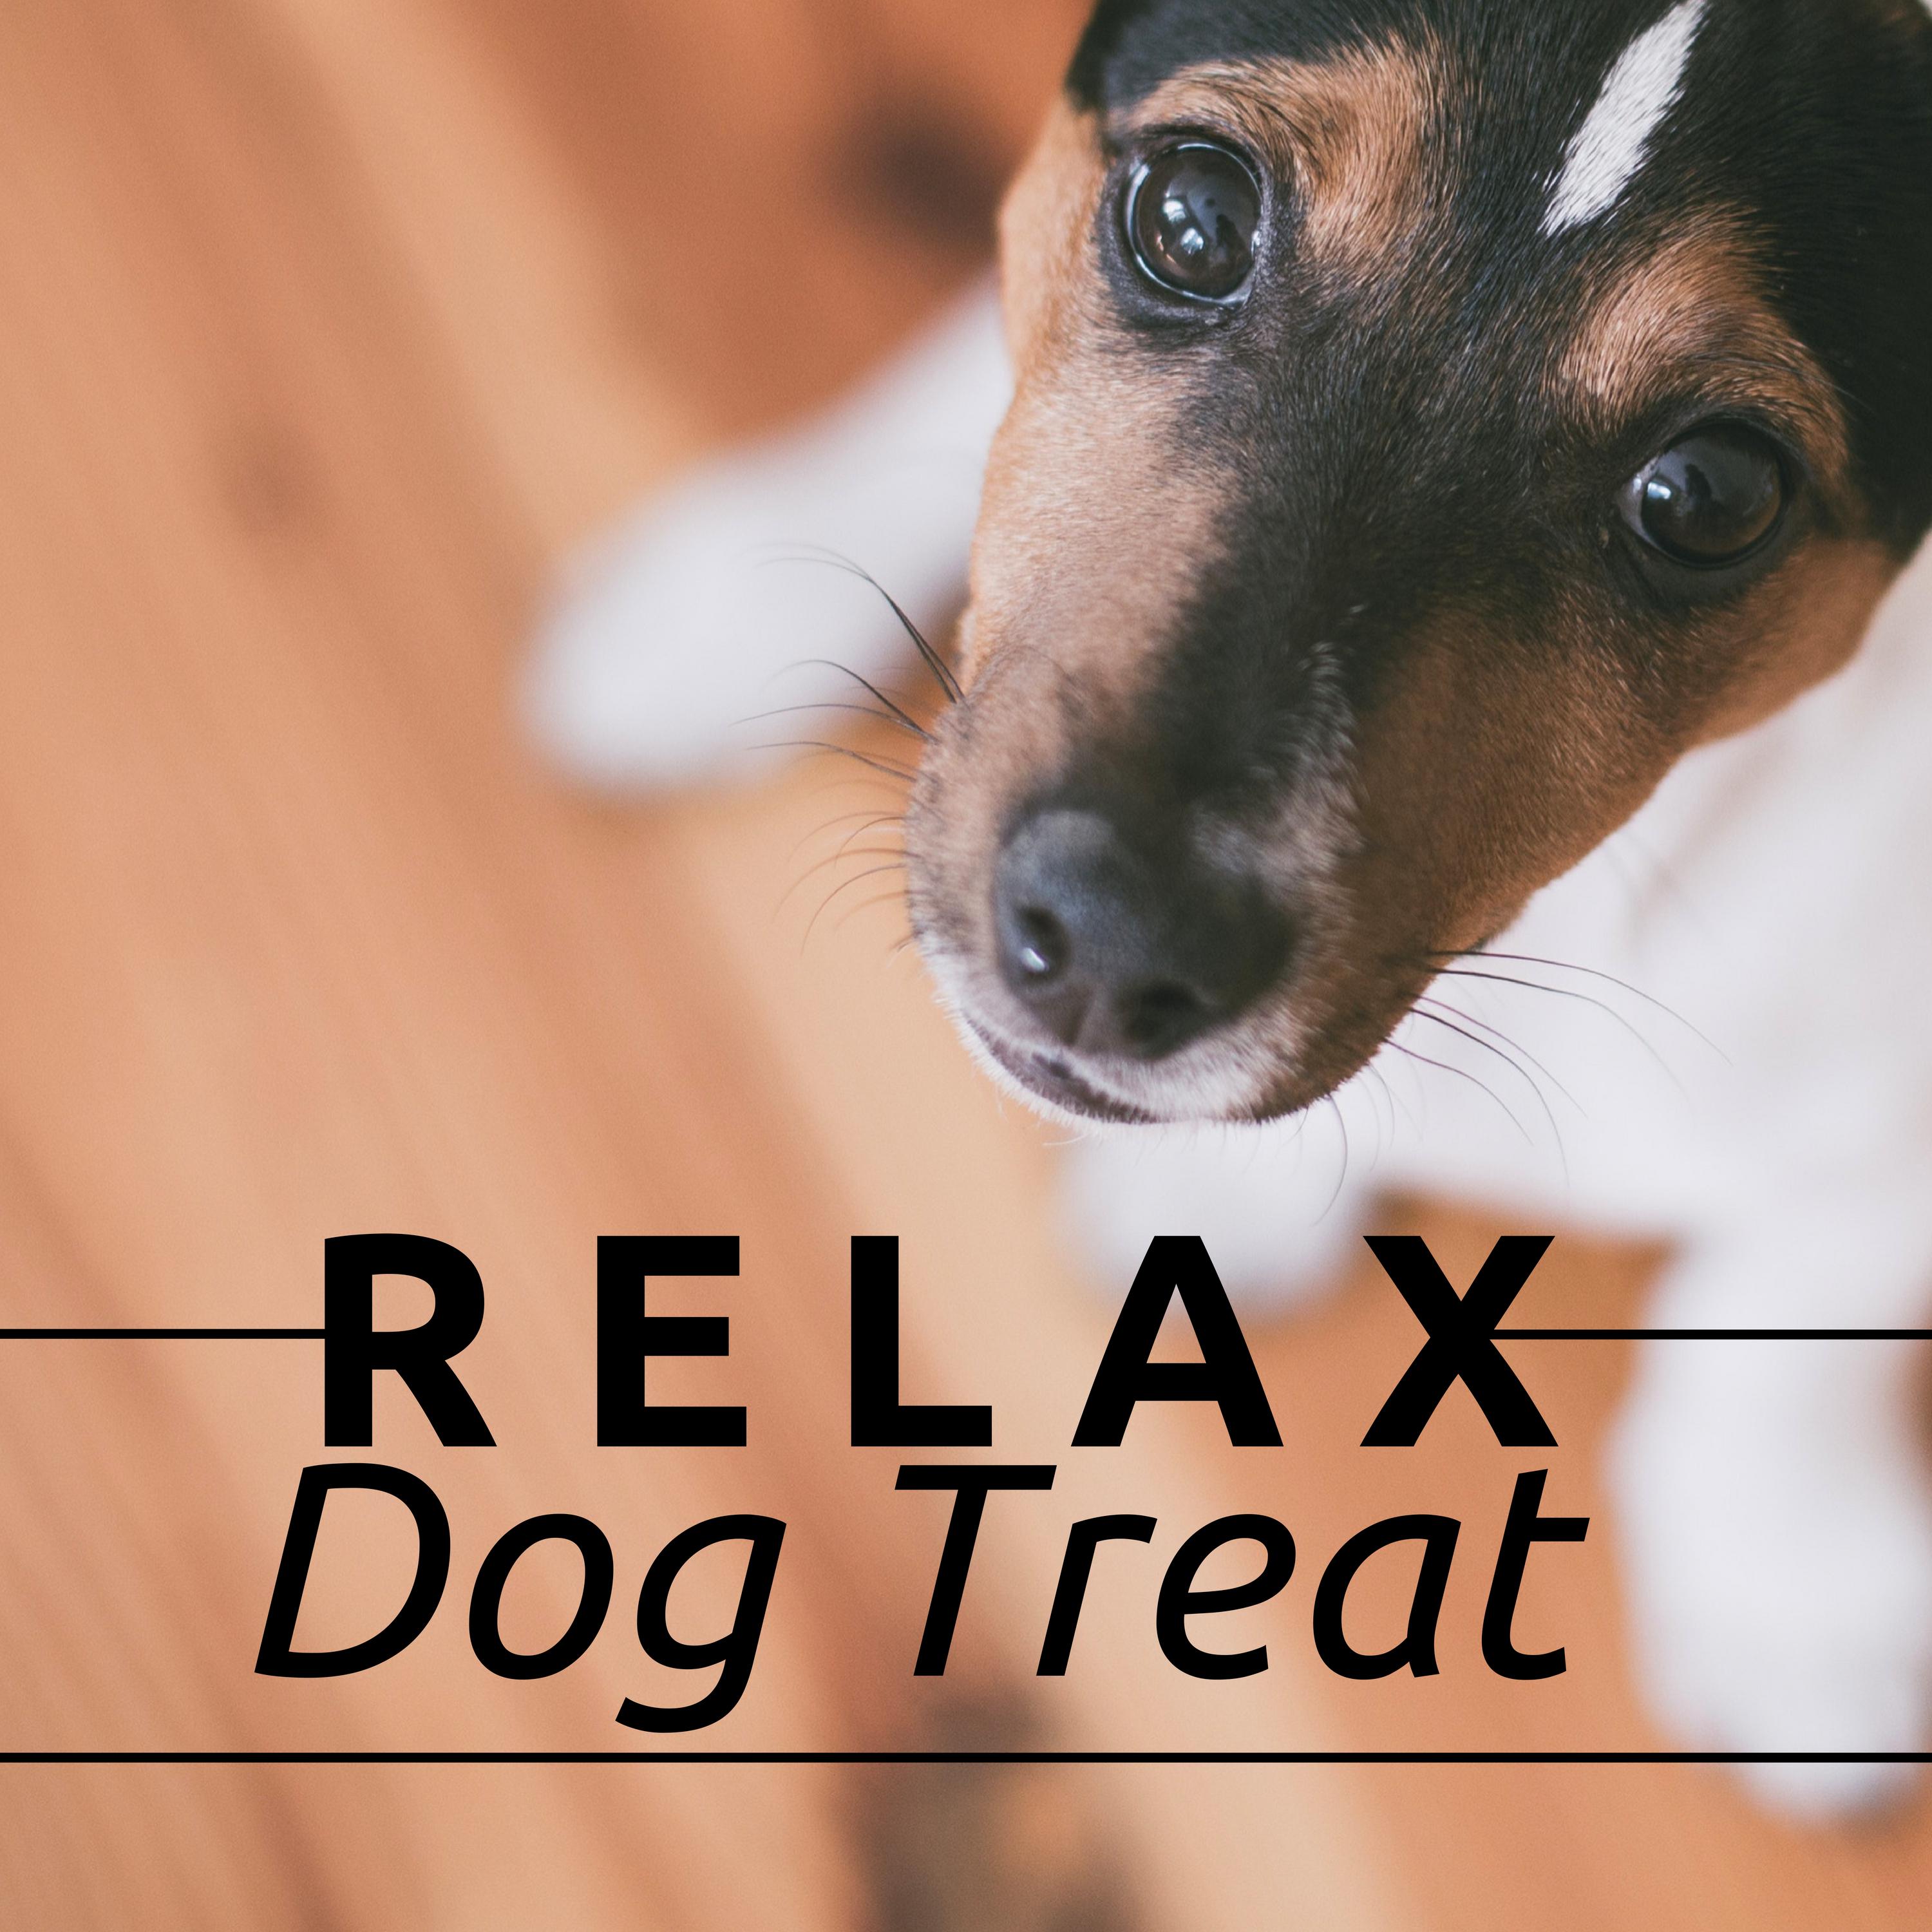 Relax Dog Treat - Top Mix of Relaxing Dog Music